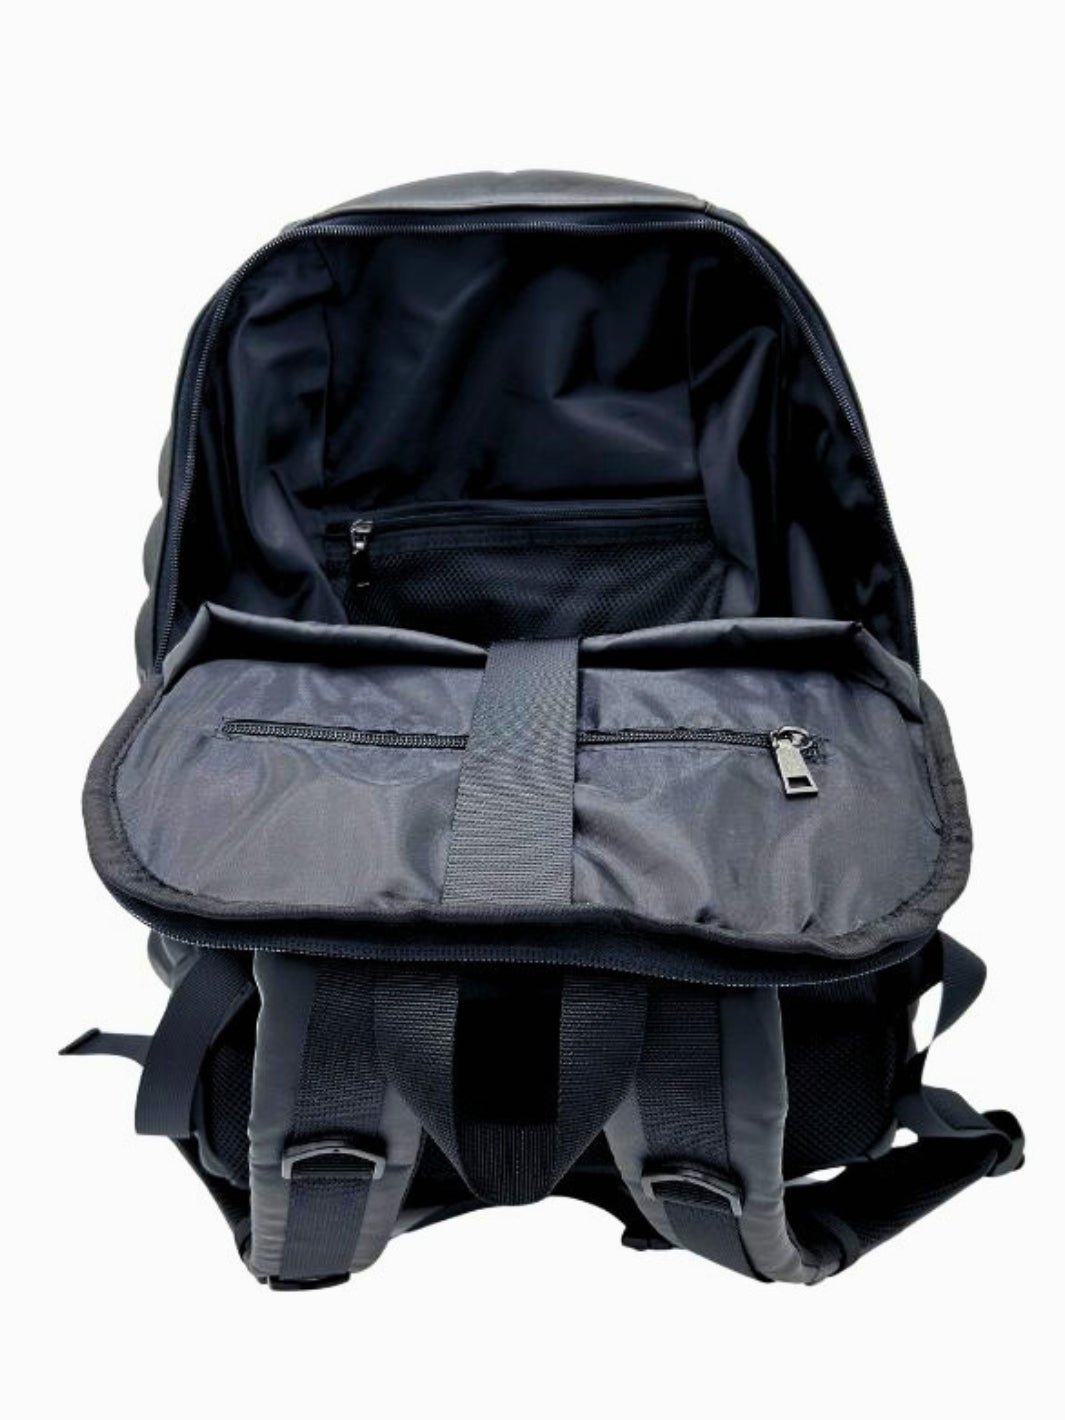 Zippered Pockets of Got Your Black Backpack | Madpax